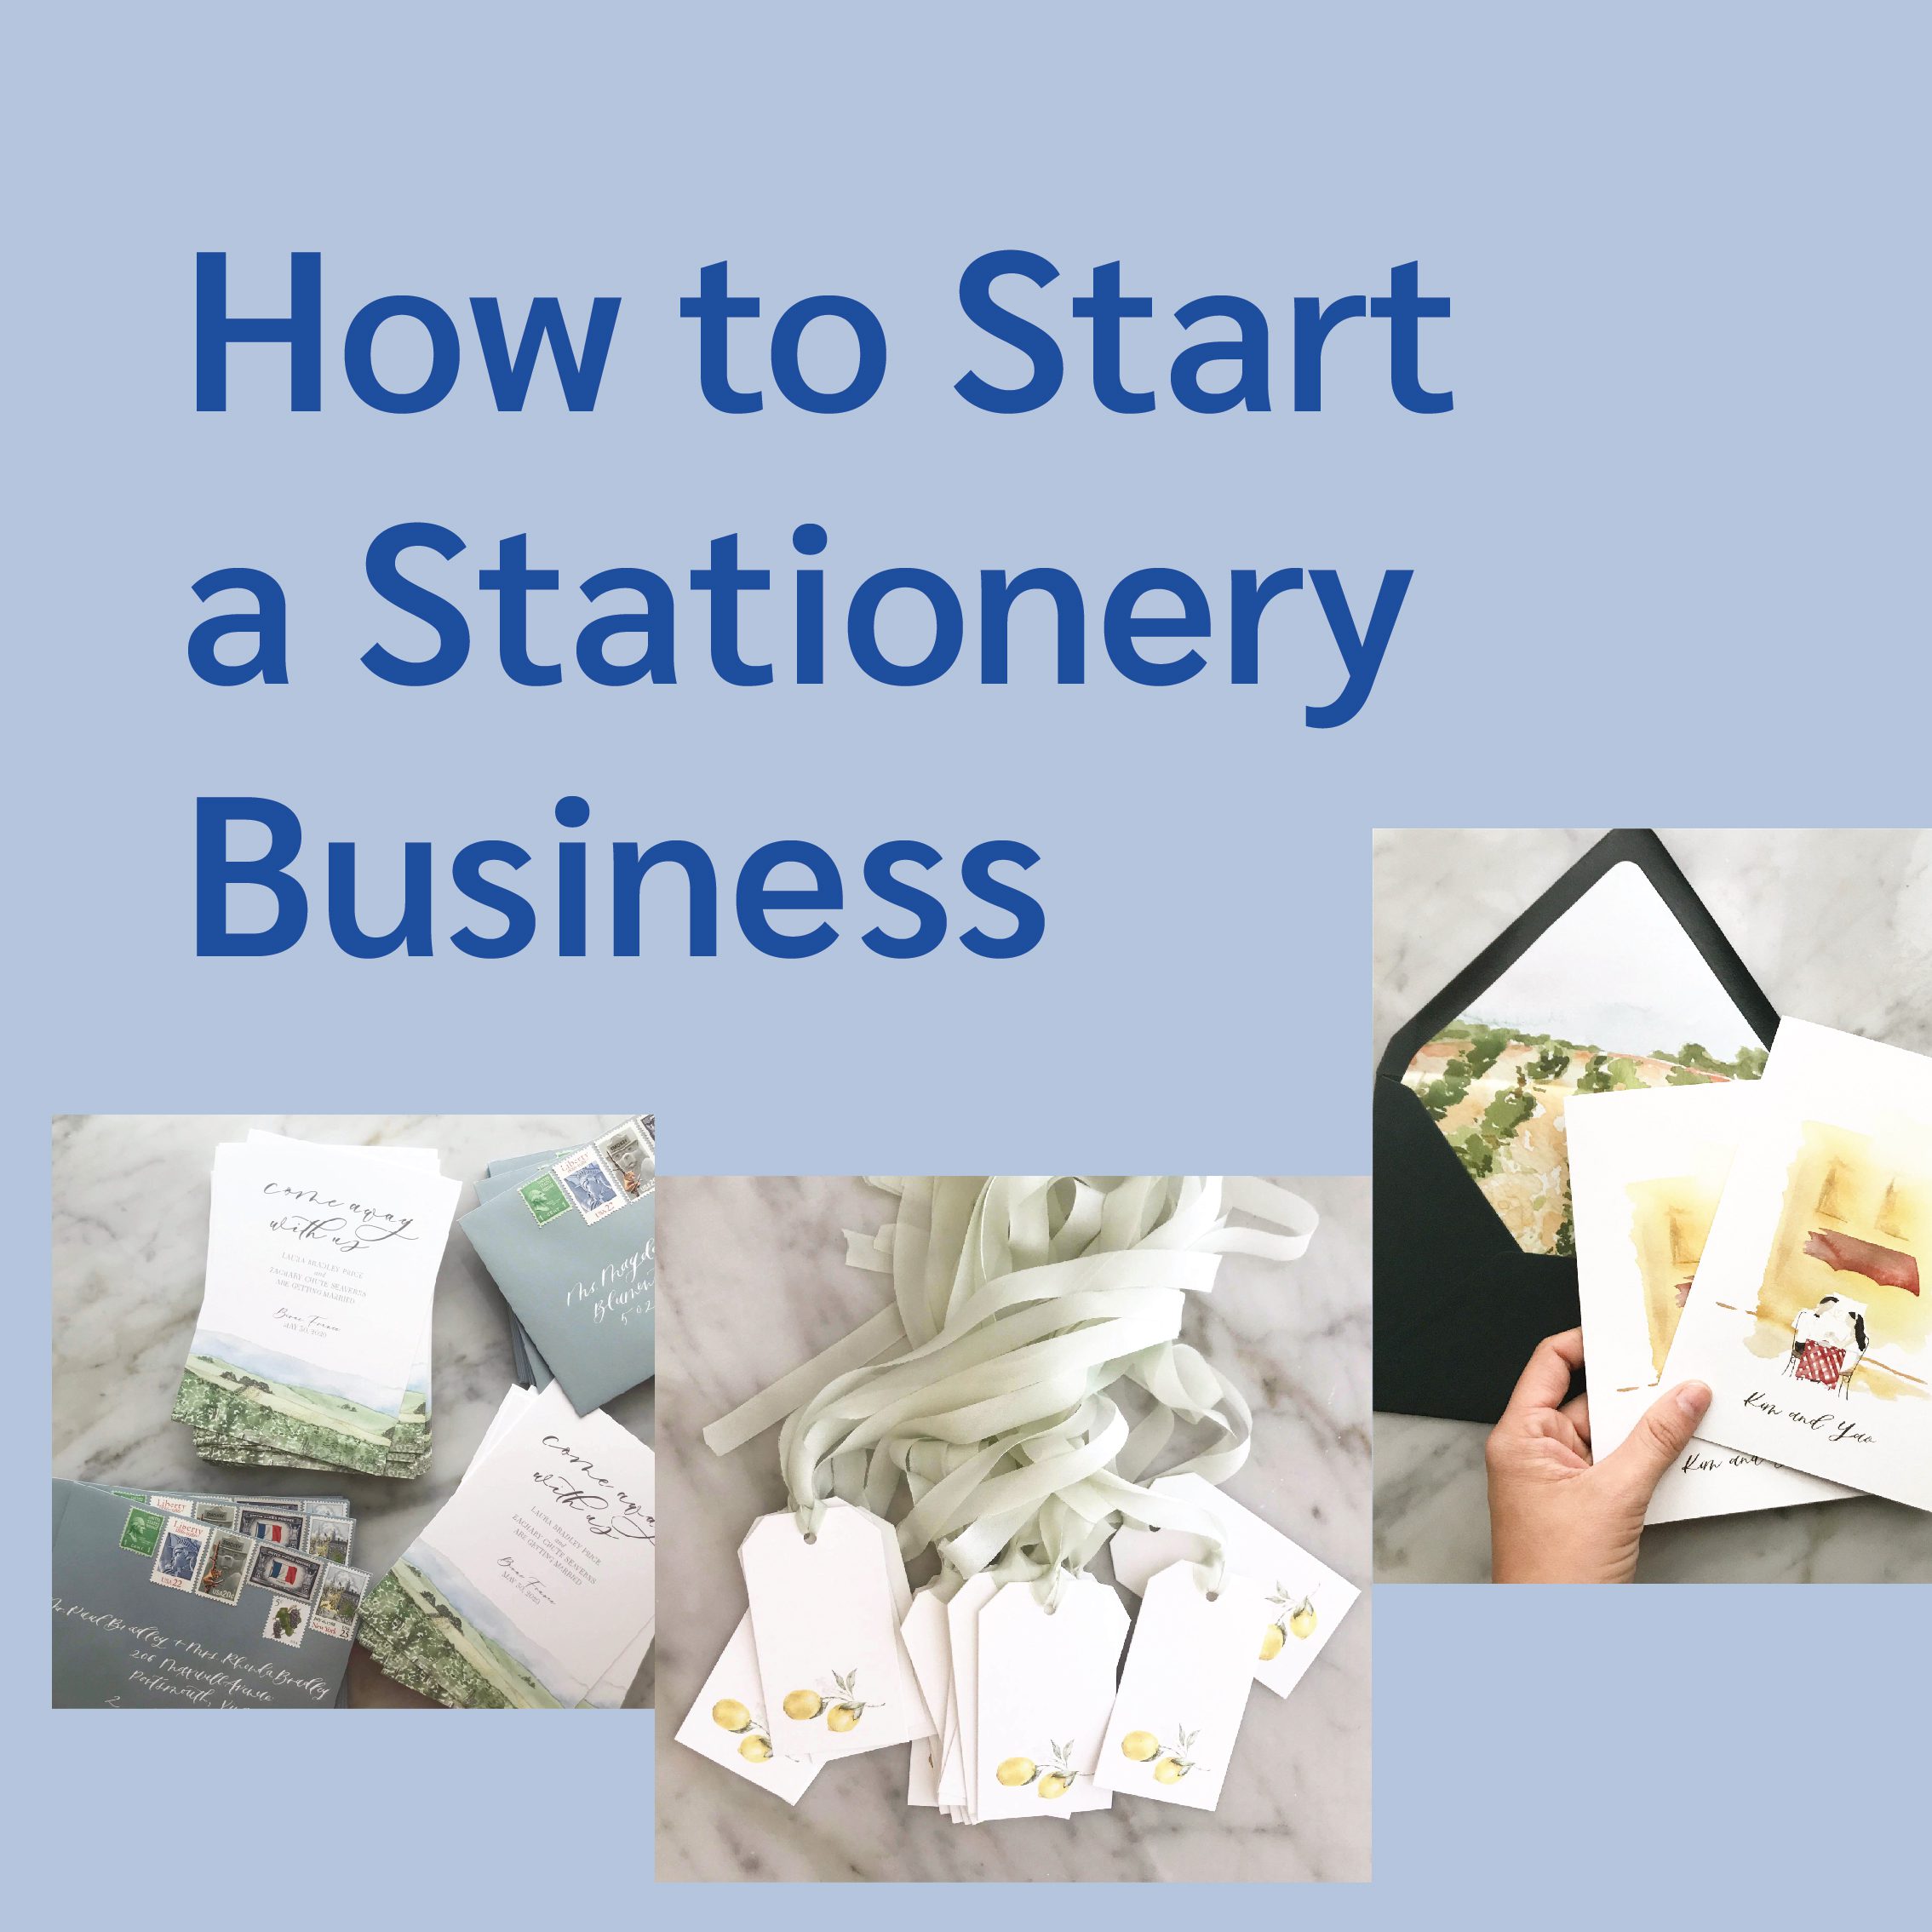 How to start a stationery business